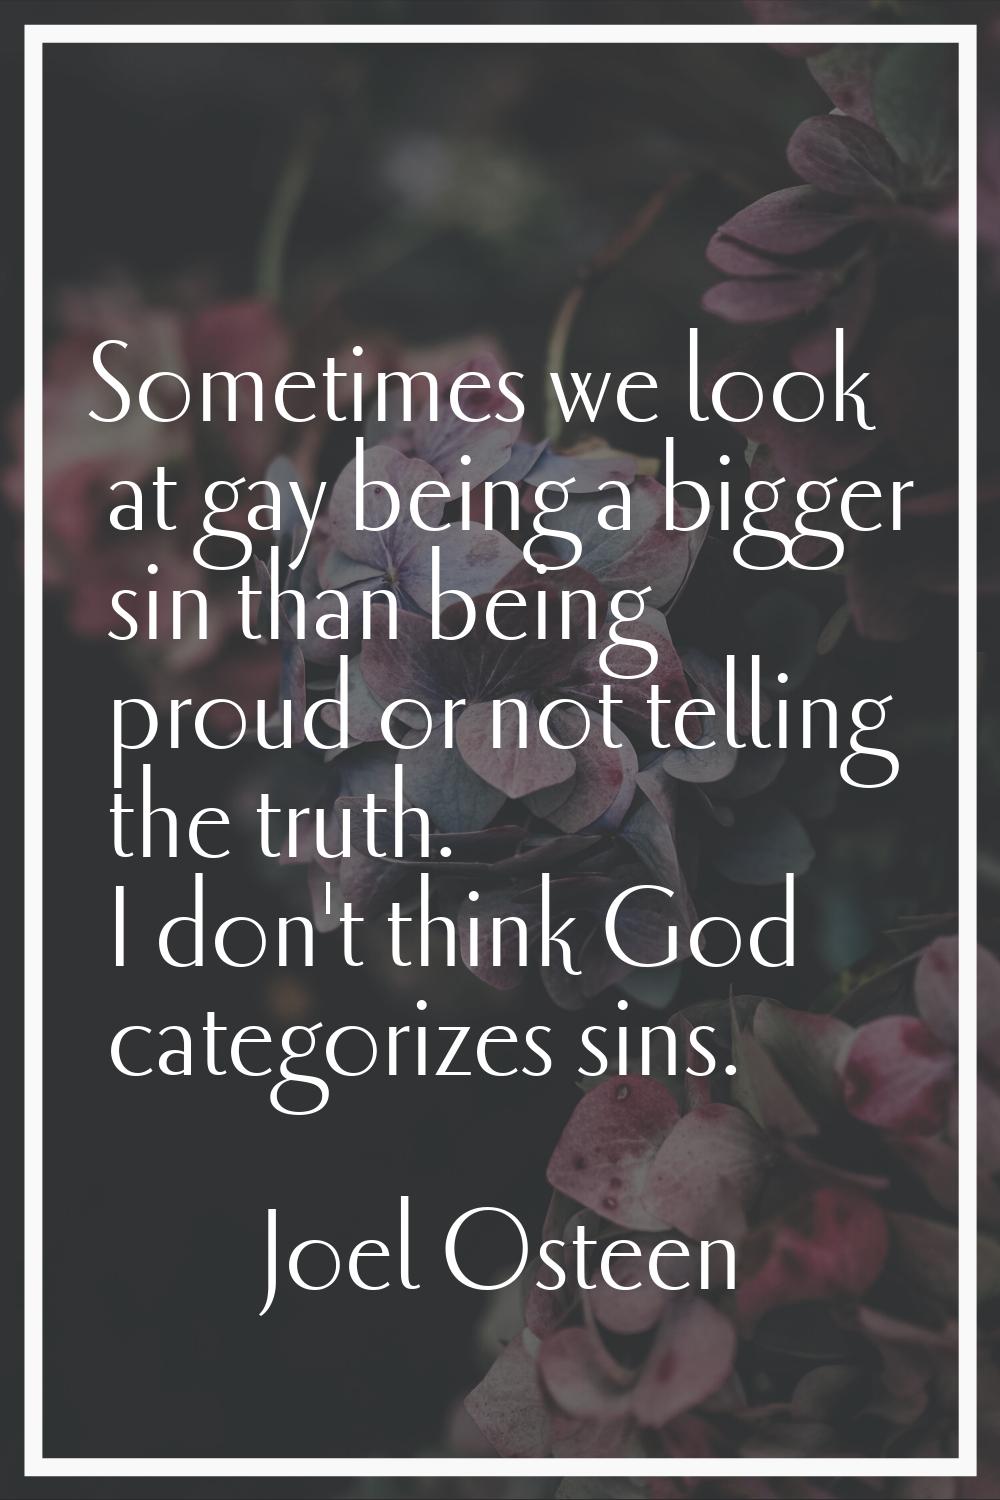 Sometimes we look at gay being a bigger sin than being proud or not telling the truth. I don't thin